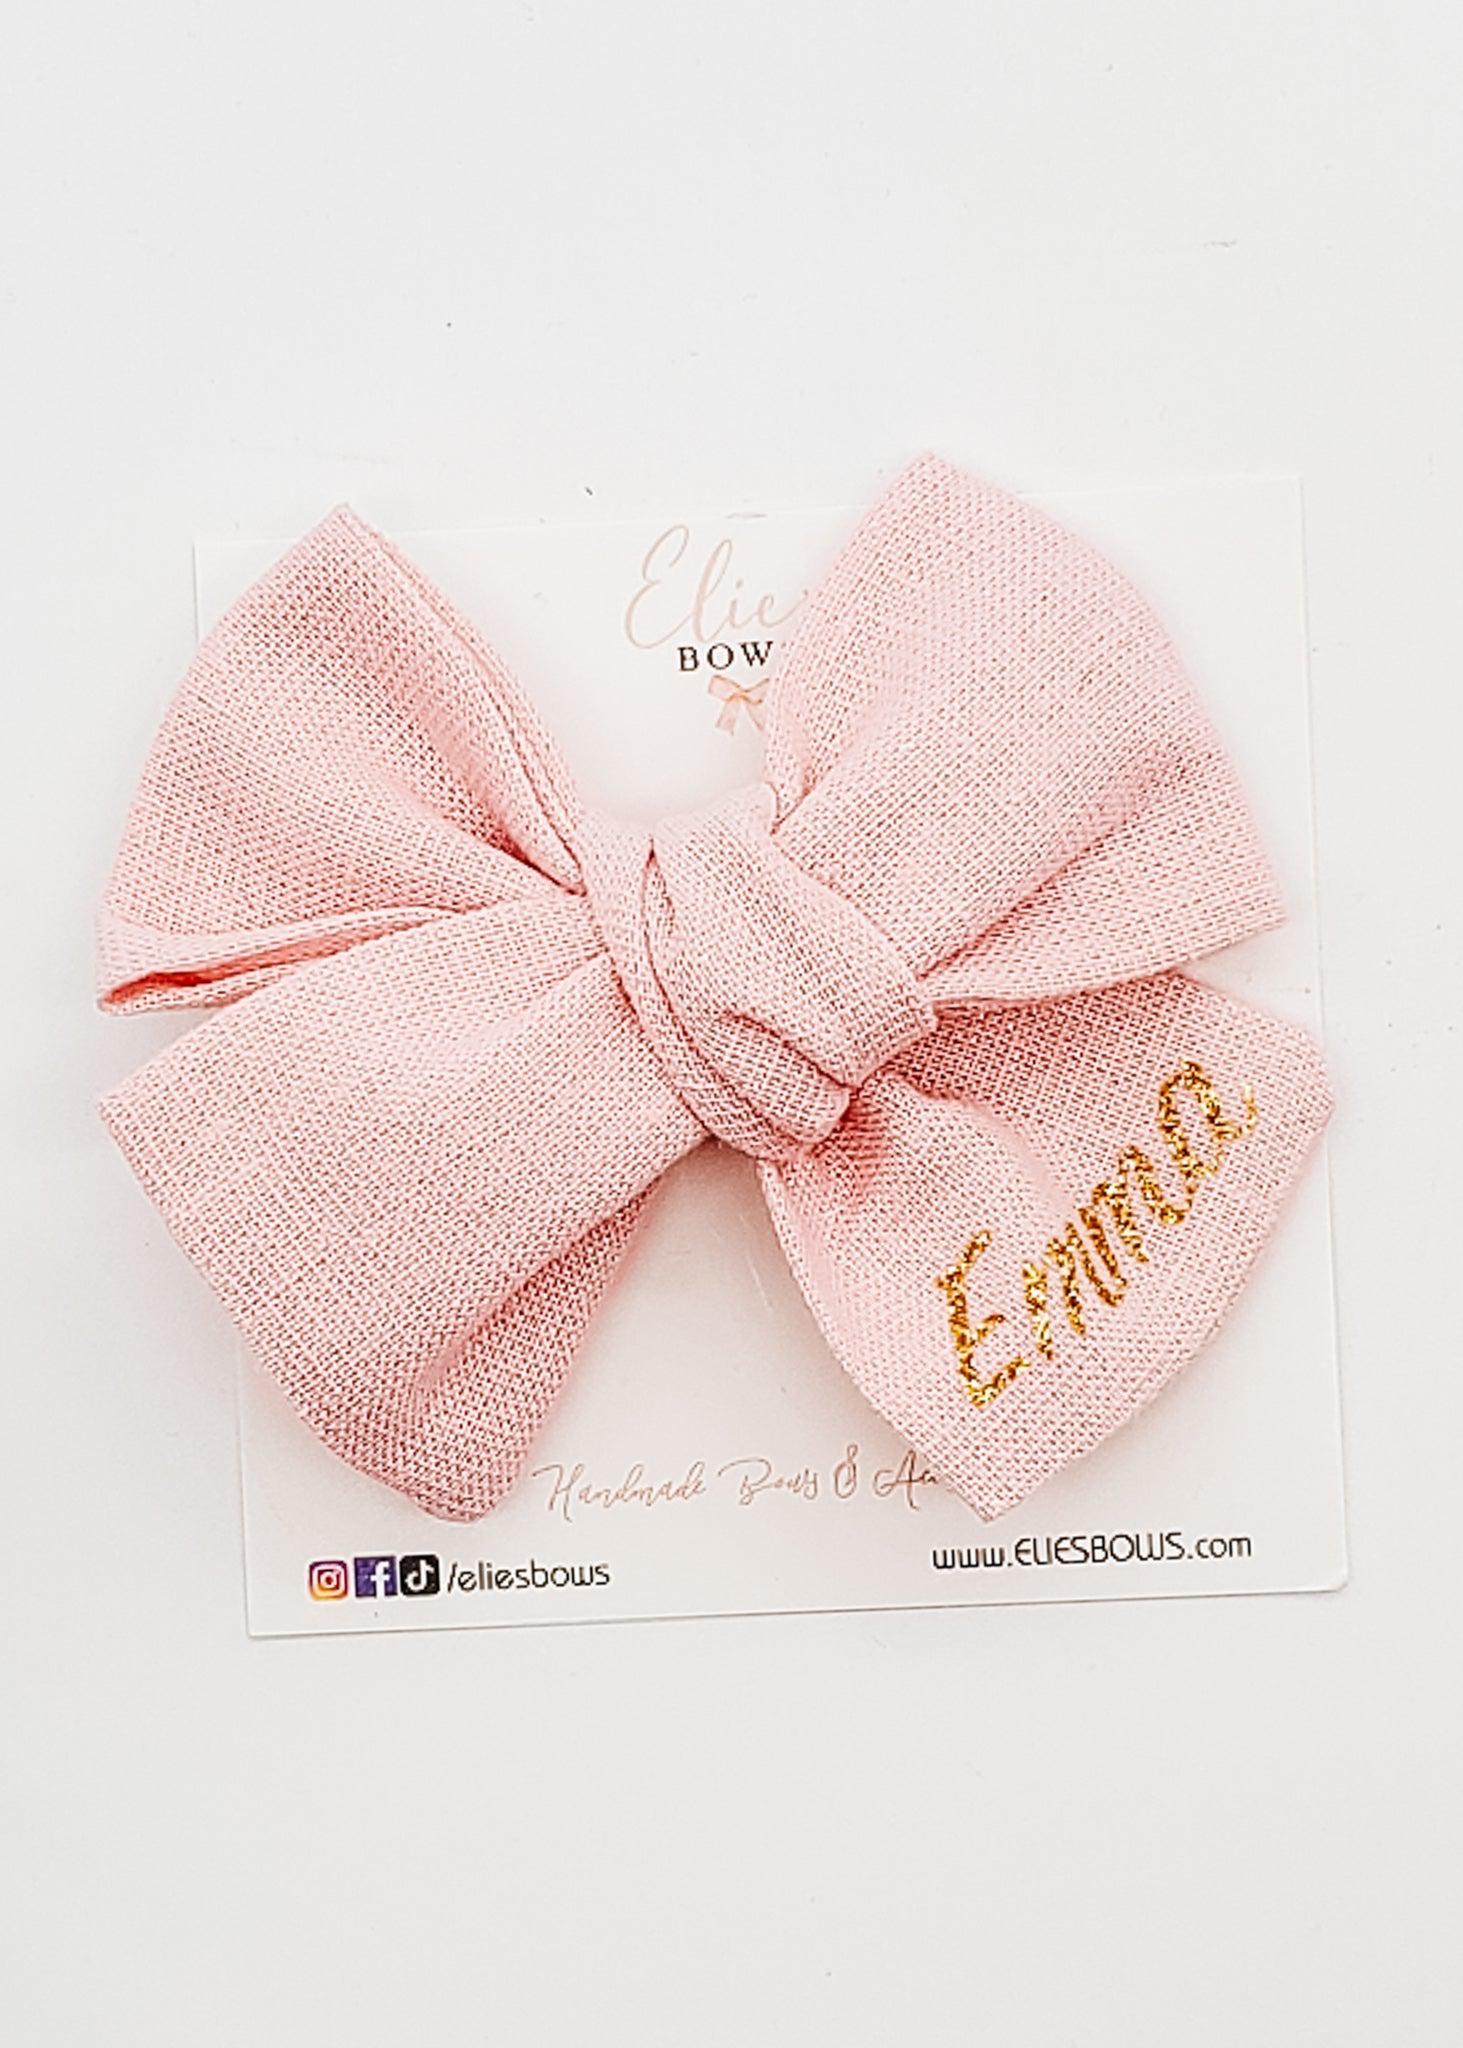 Personalized Pink - Elie Fabric Bow - 3.5" (please include name in notes)-Bows-Elie’s Bows